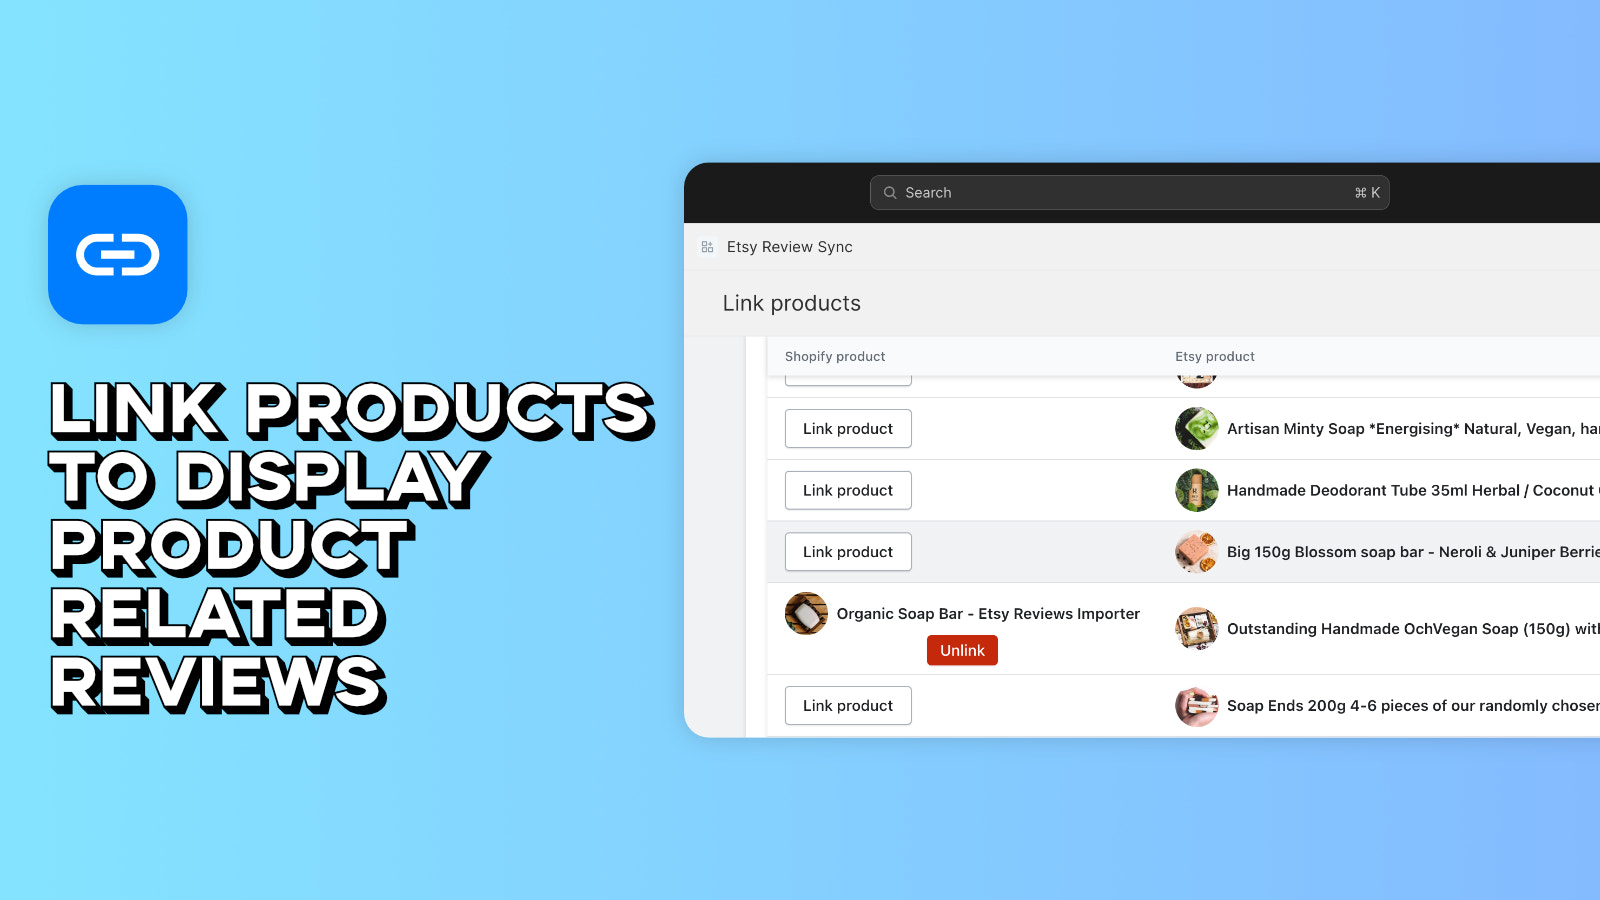 Etsy Reviews Importer - Product related reviews